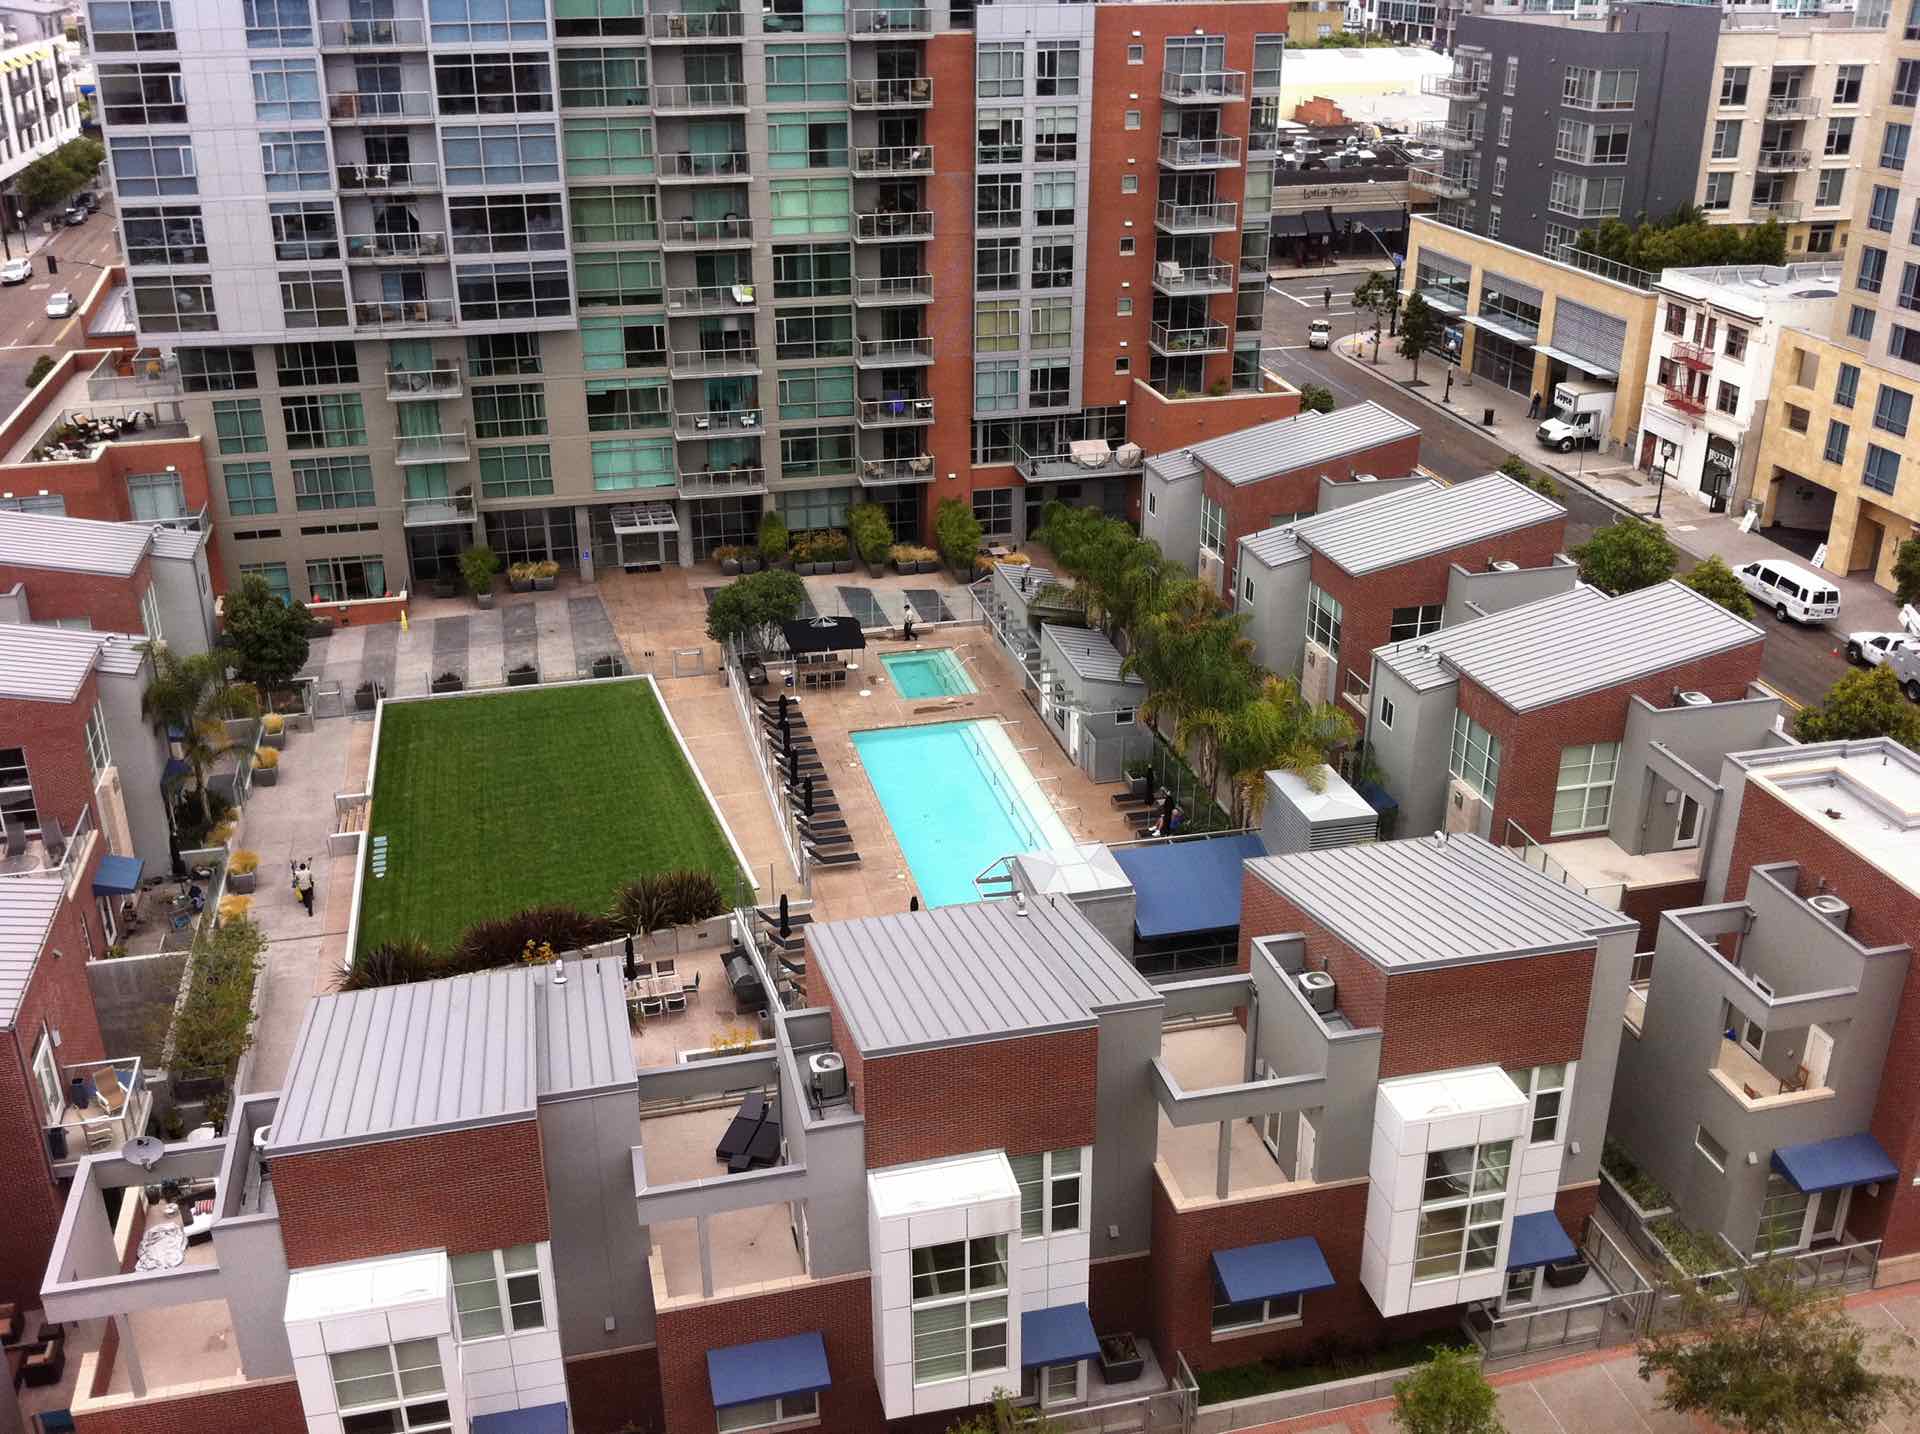 Town homes in San Diego East Village District